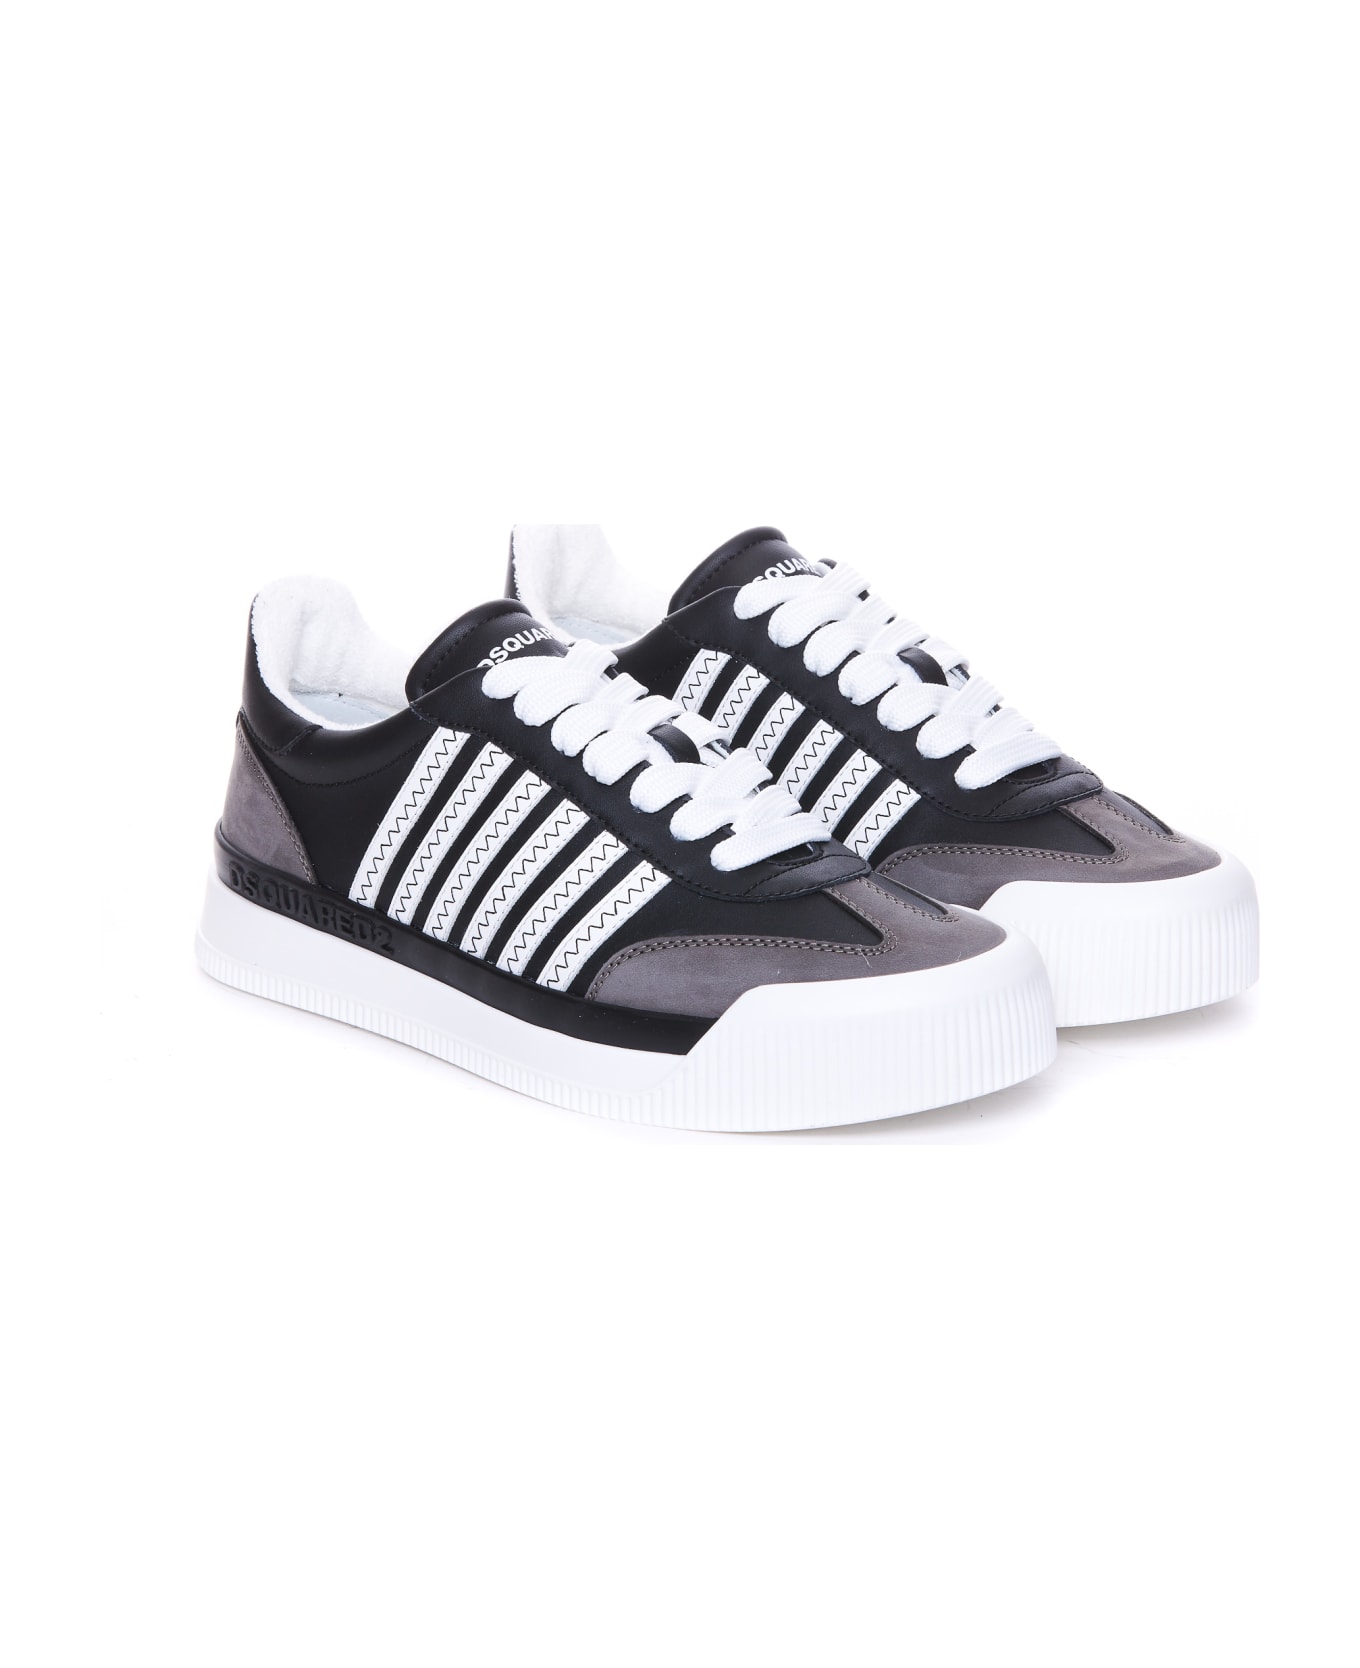 Dsquared2 New Jersey Sneakers - NERO-BIANCO スニーカー